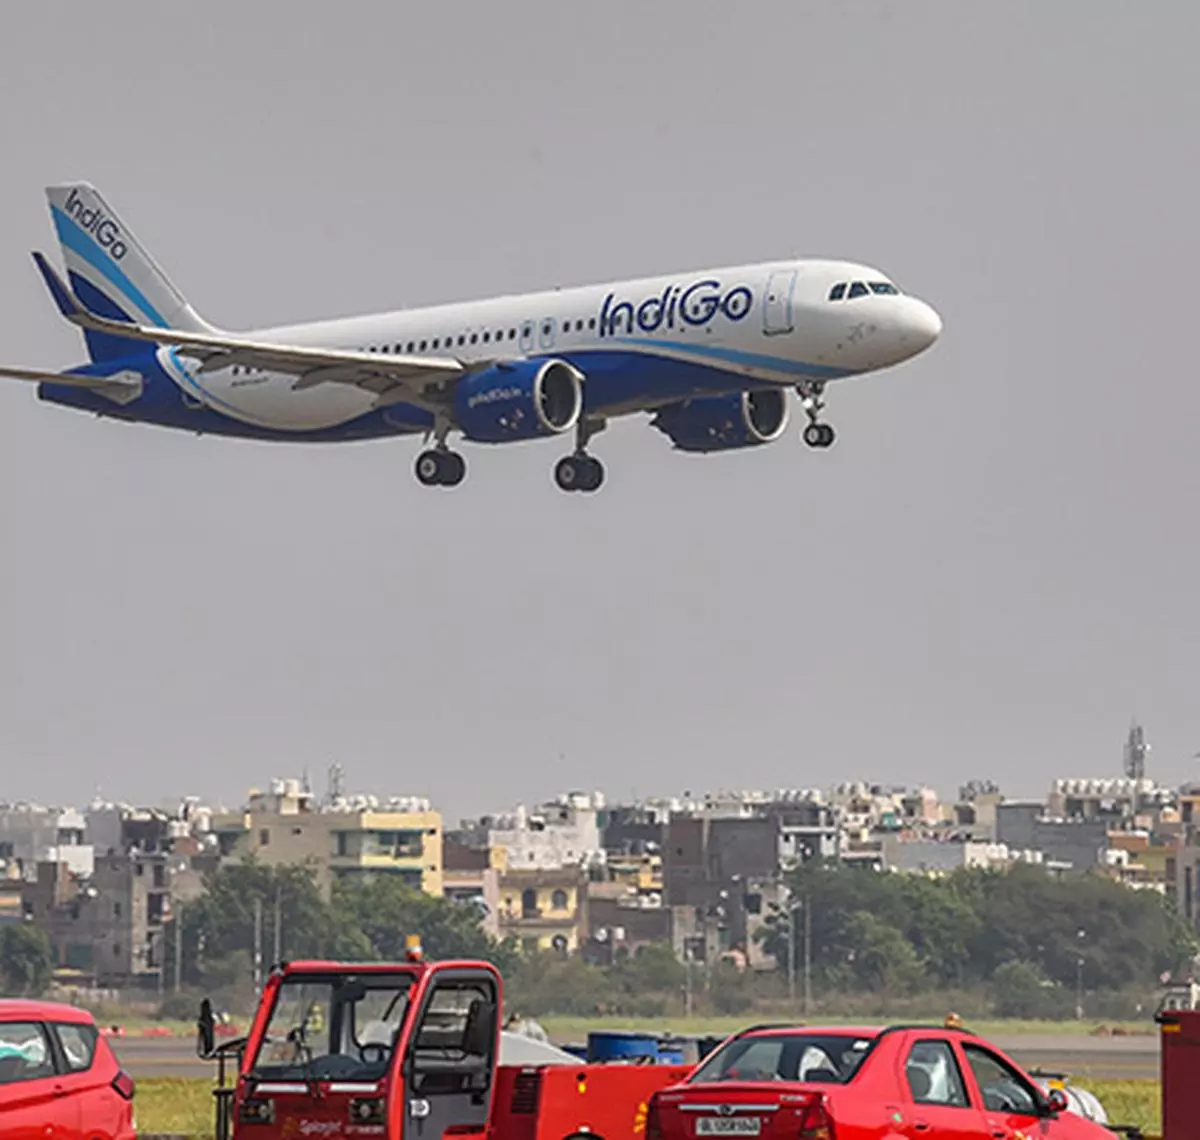 The airline’s total income came in at ₹13,018.80 crore for the quarter, the highest ever